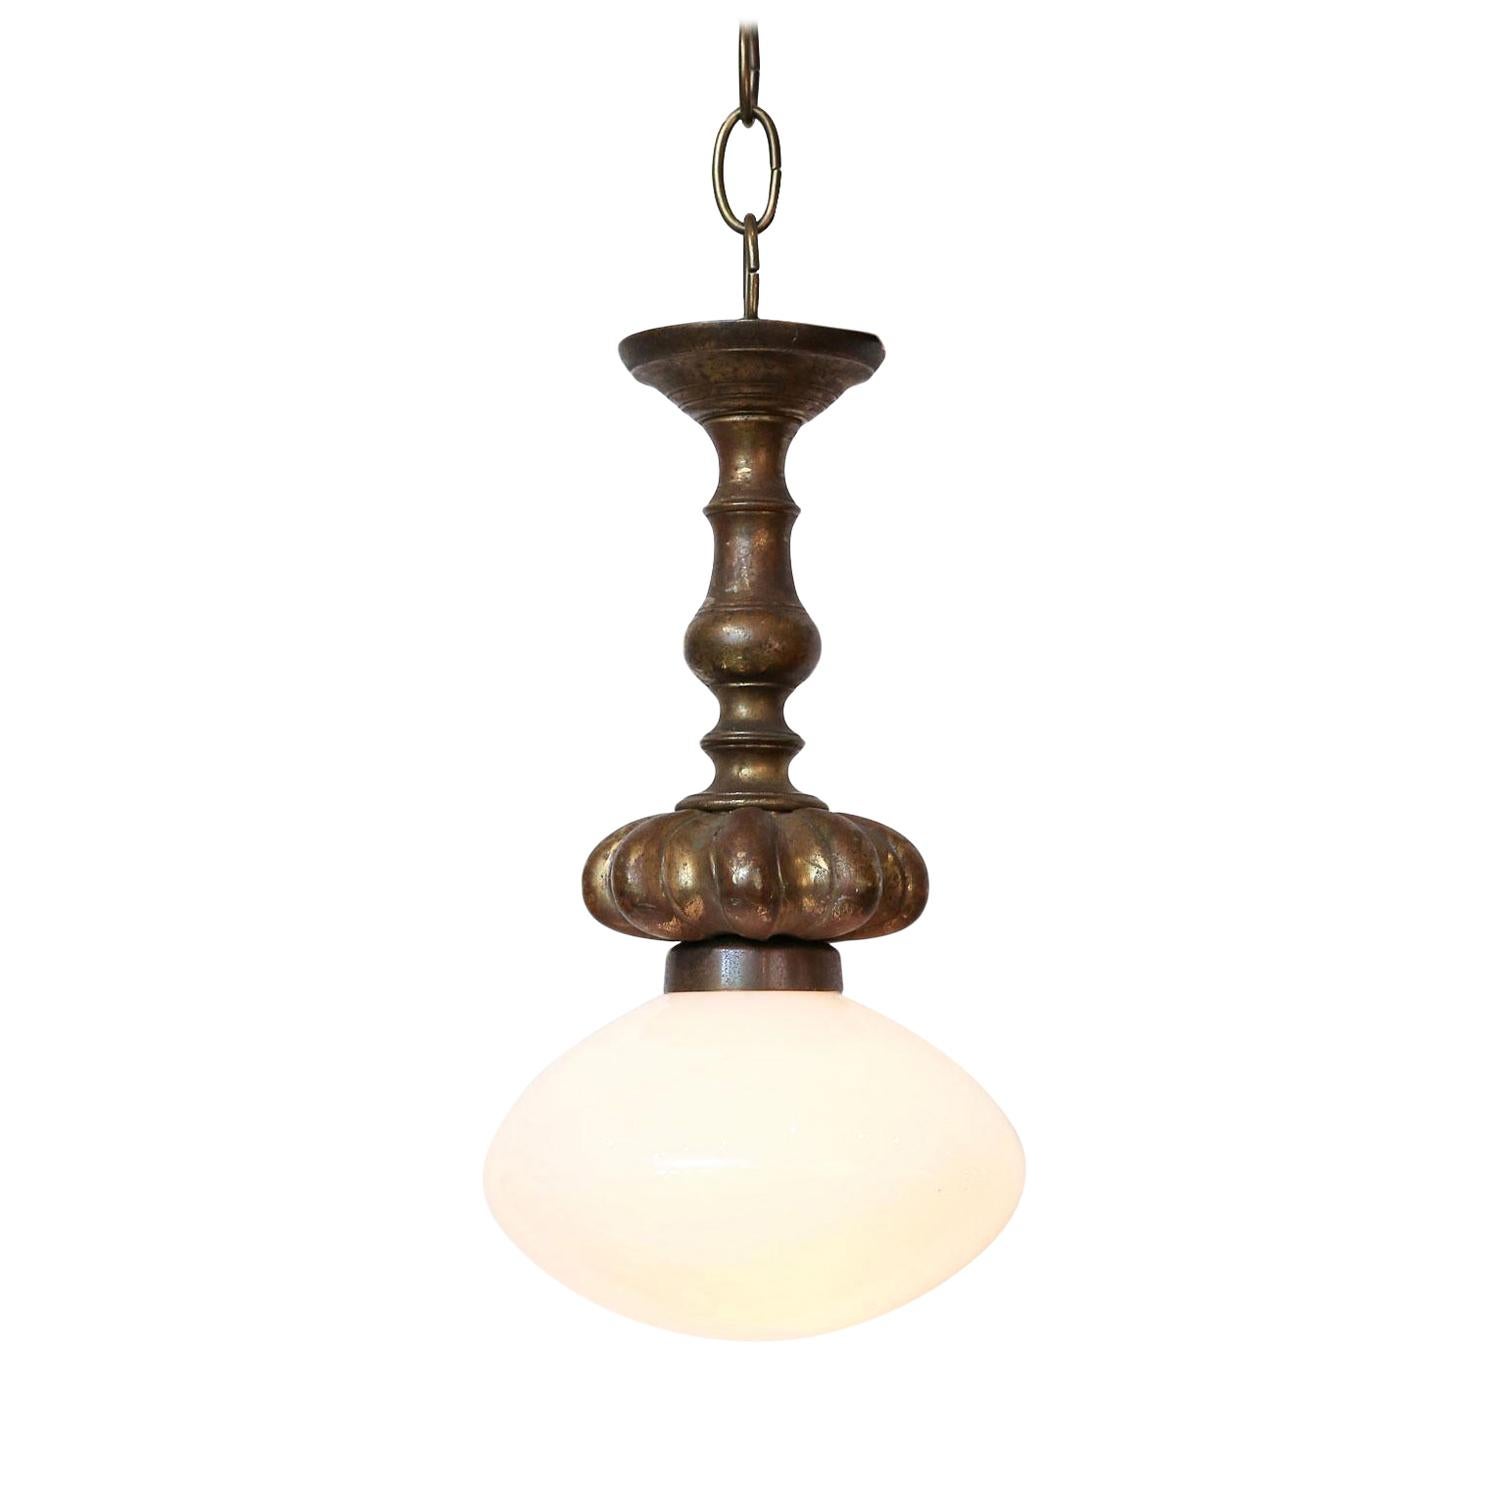 Cast French Bronze Pendant with Antique Milk Glass Shade